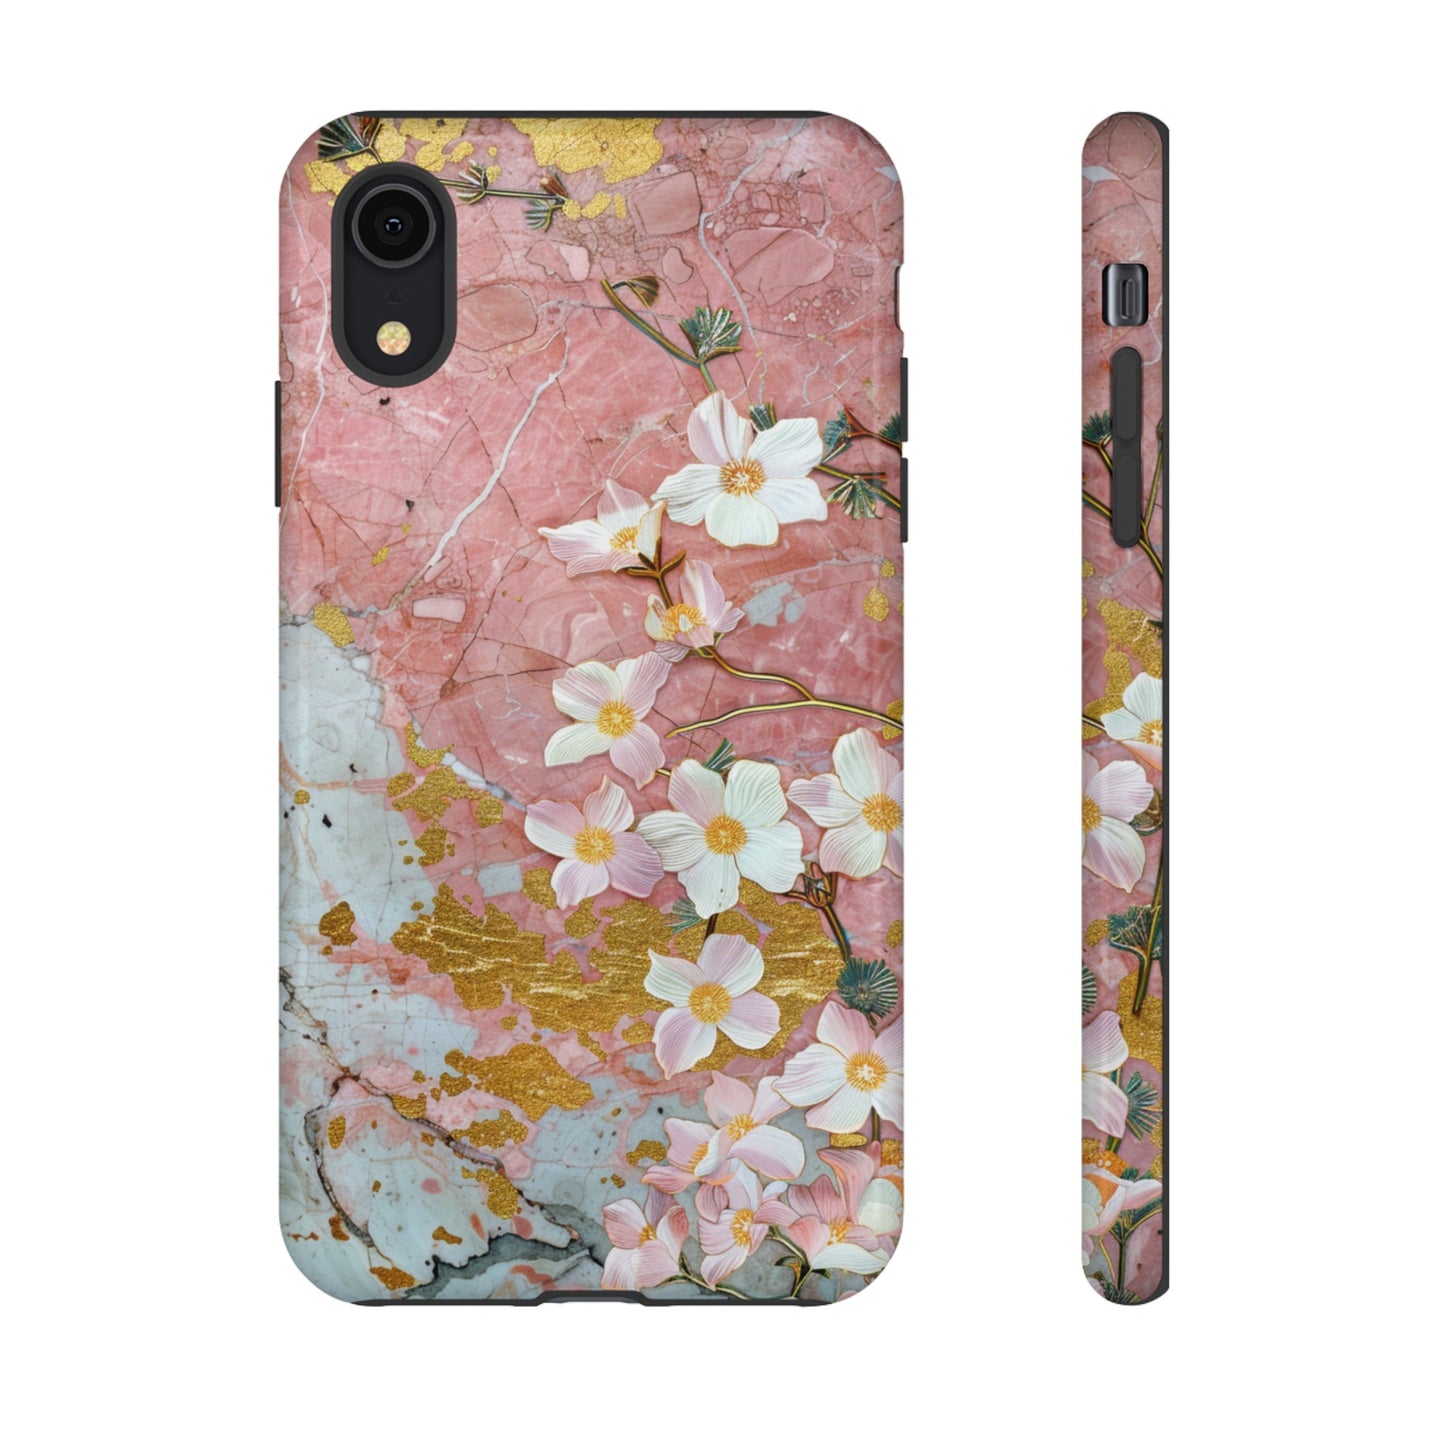 Delicate Flower Phone Protection